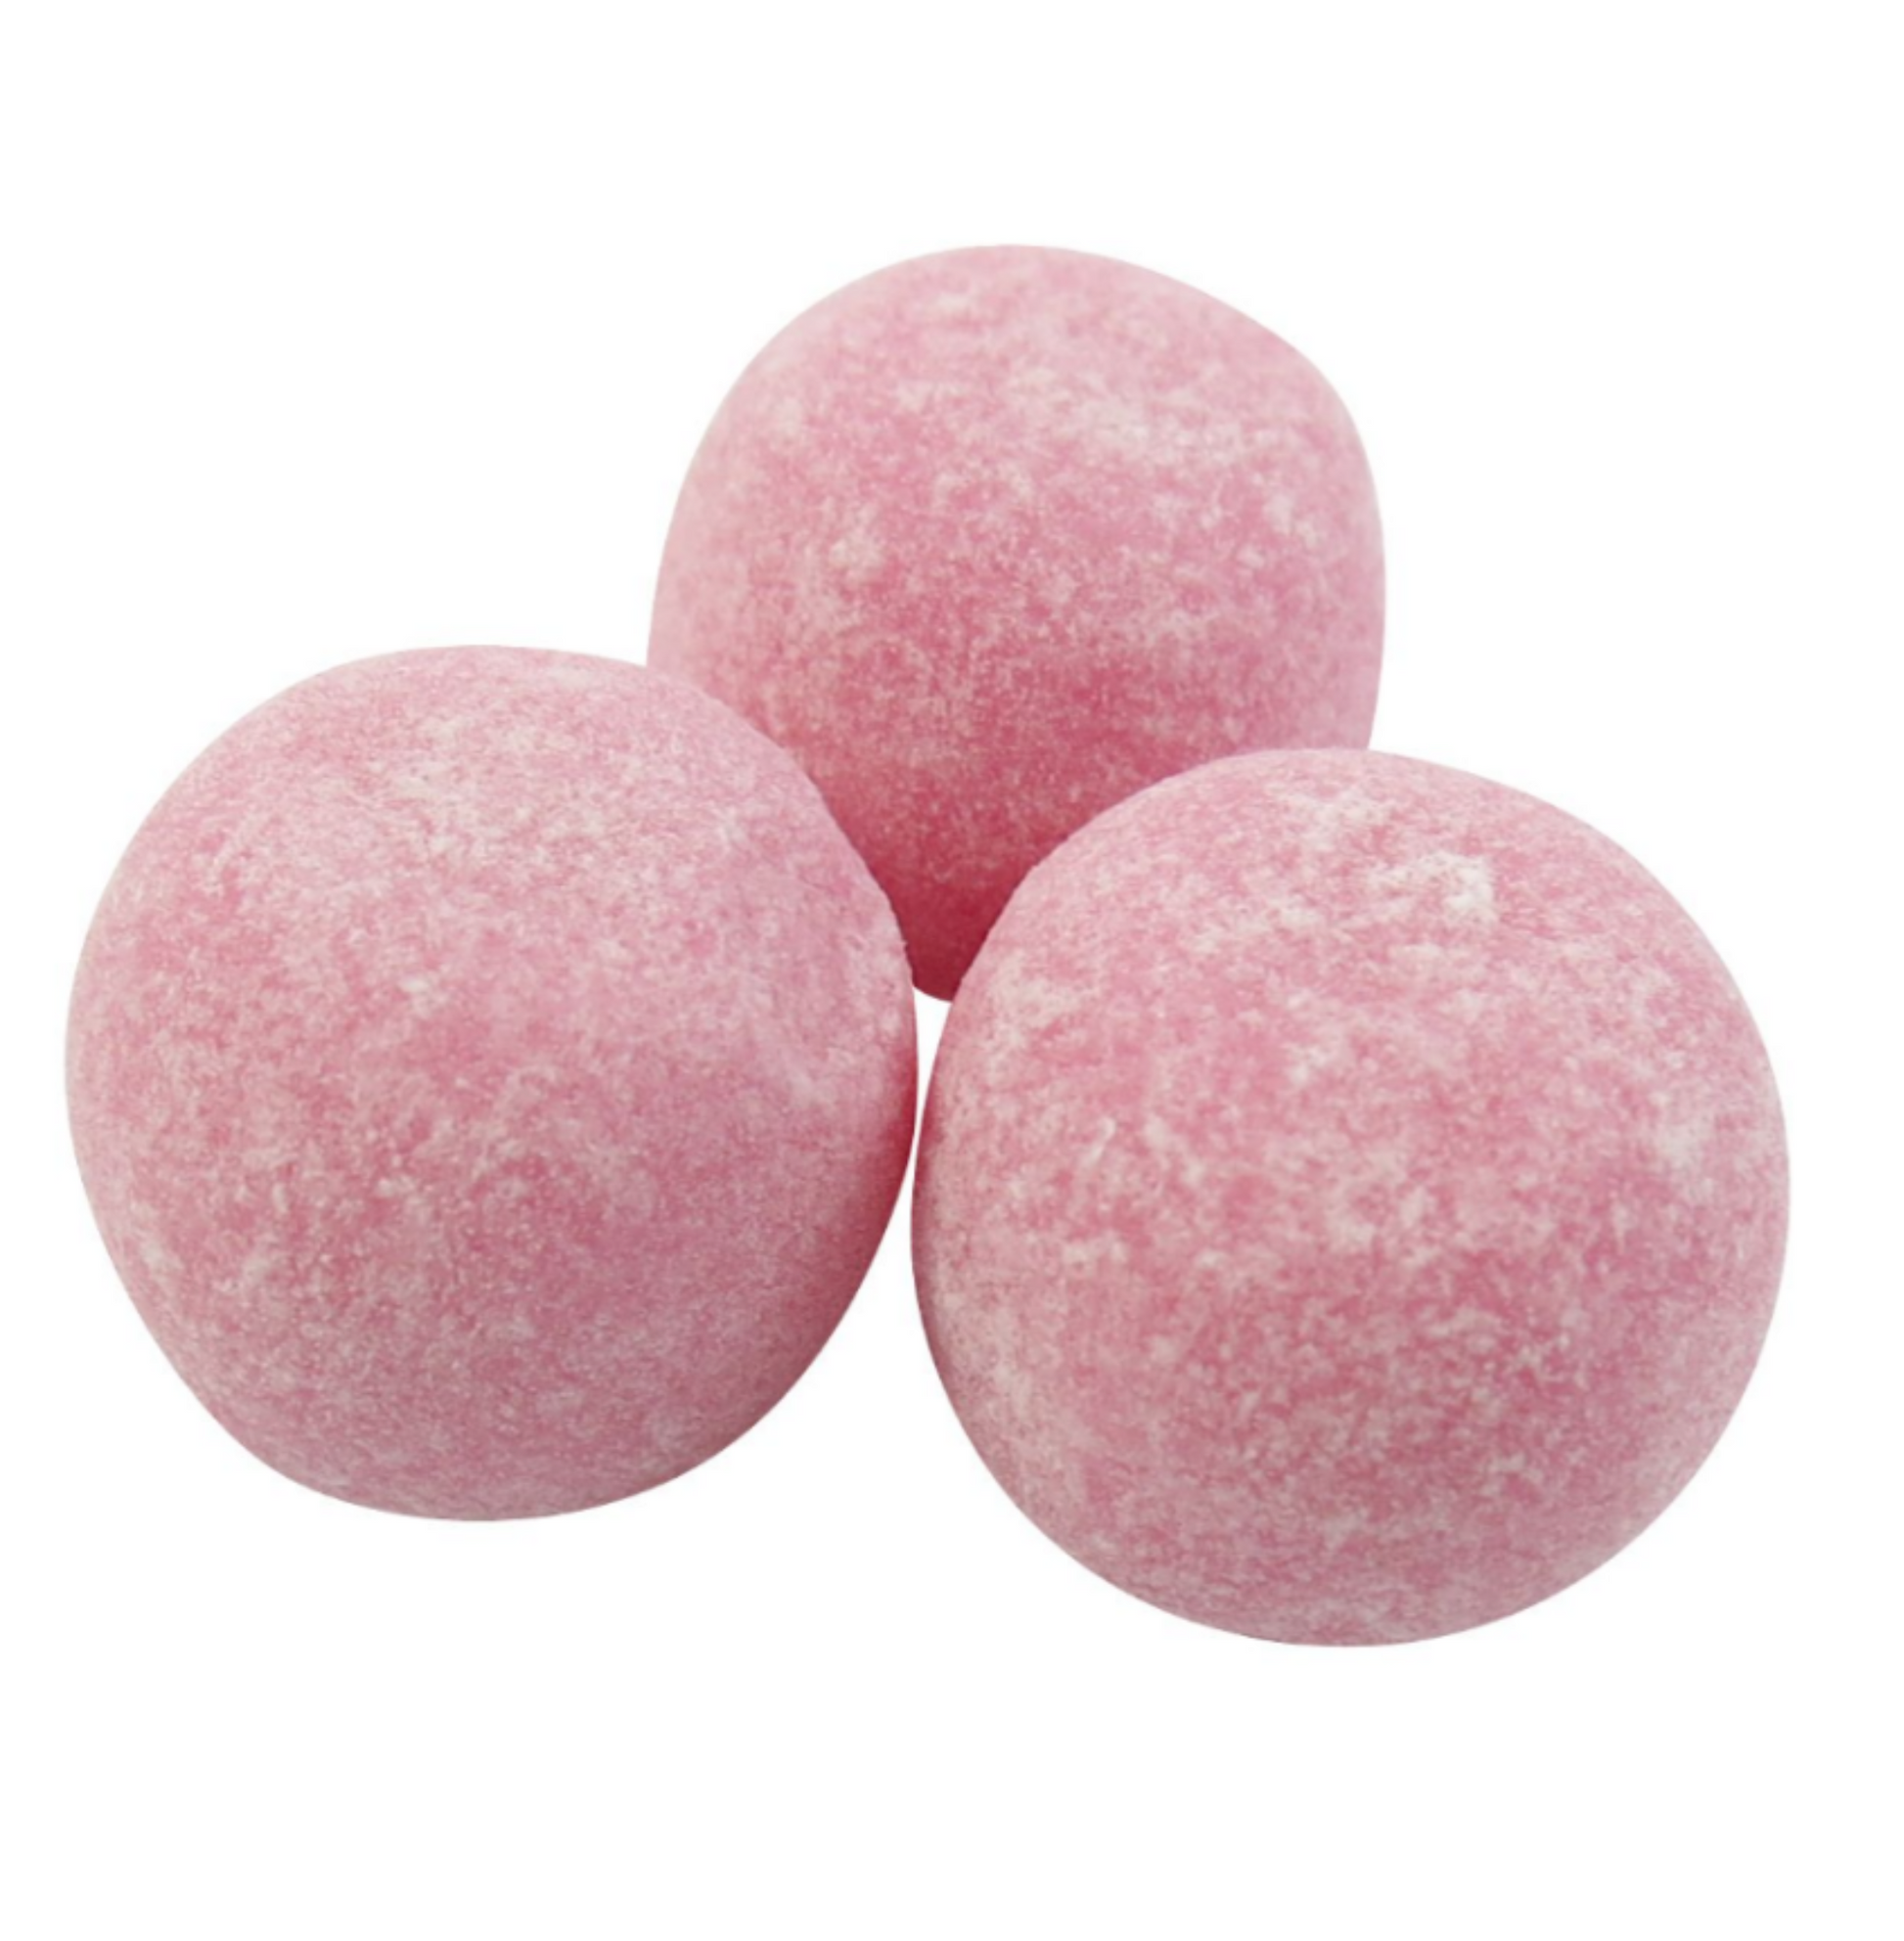 Pink colour Sweets for wedding and event in UK